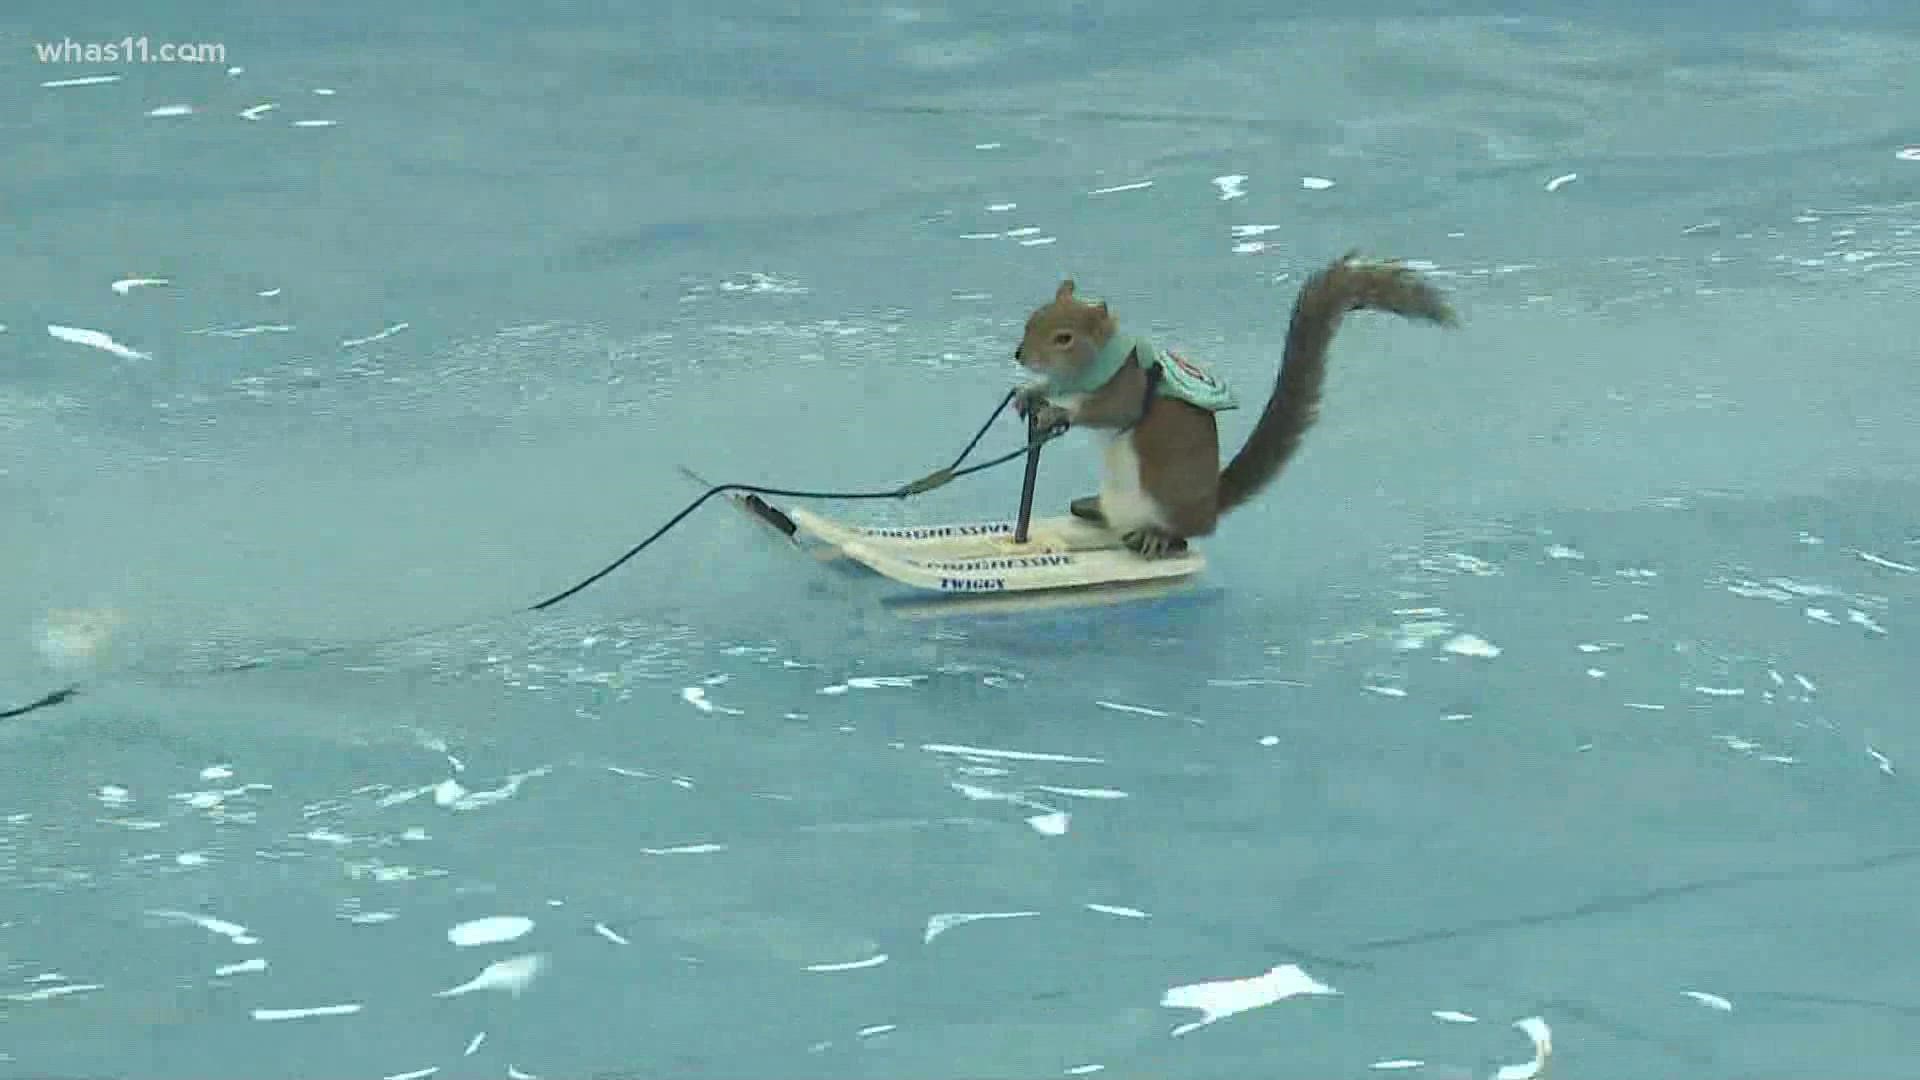 Twiggy the water skiing squirrel teaches water safety at this year's event.